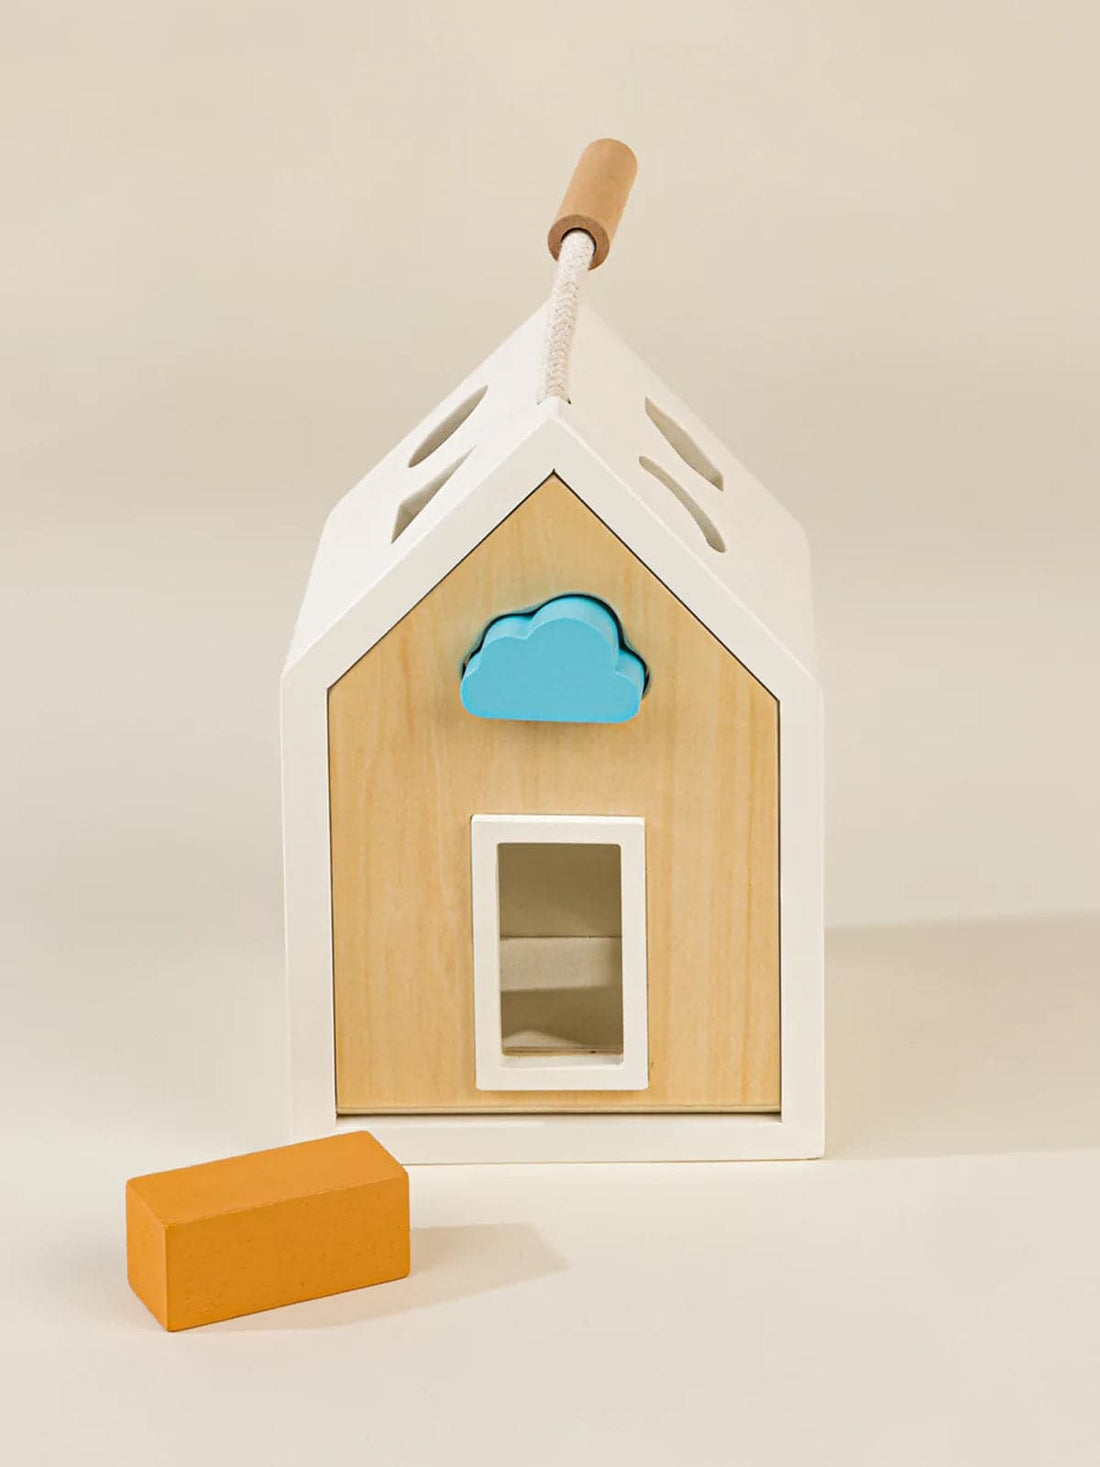 WOODEN SHAPES SORTING HOUSE - Norman & Jules